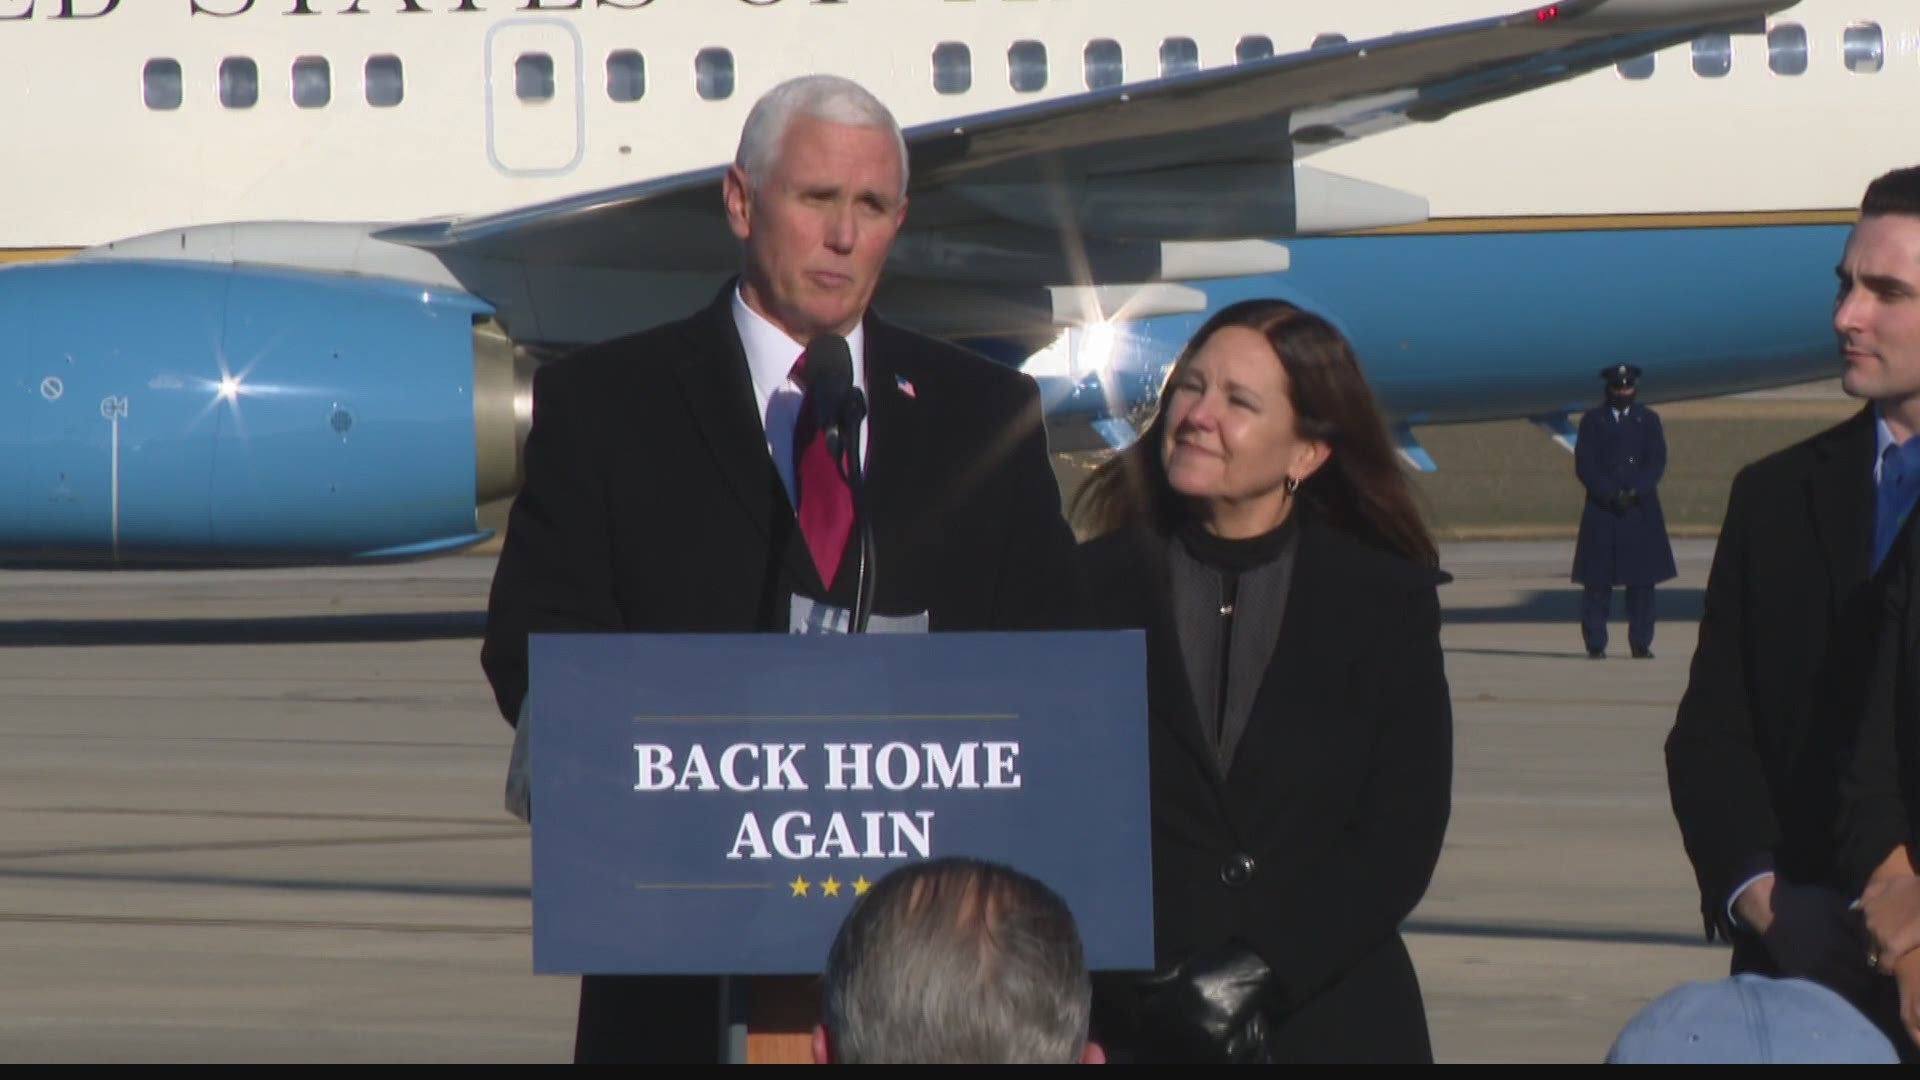 'There's no place like home,' Pence told a crowd in Columbus Wednesday.